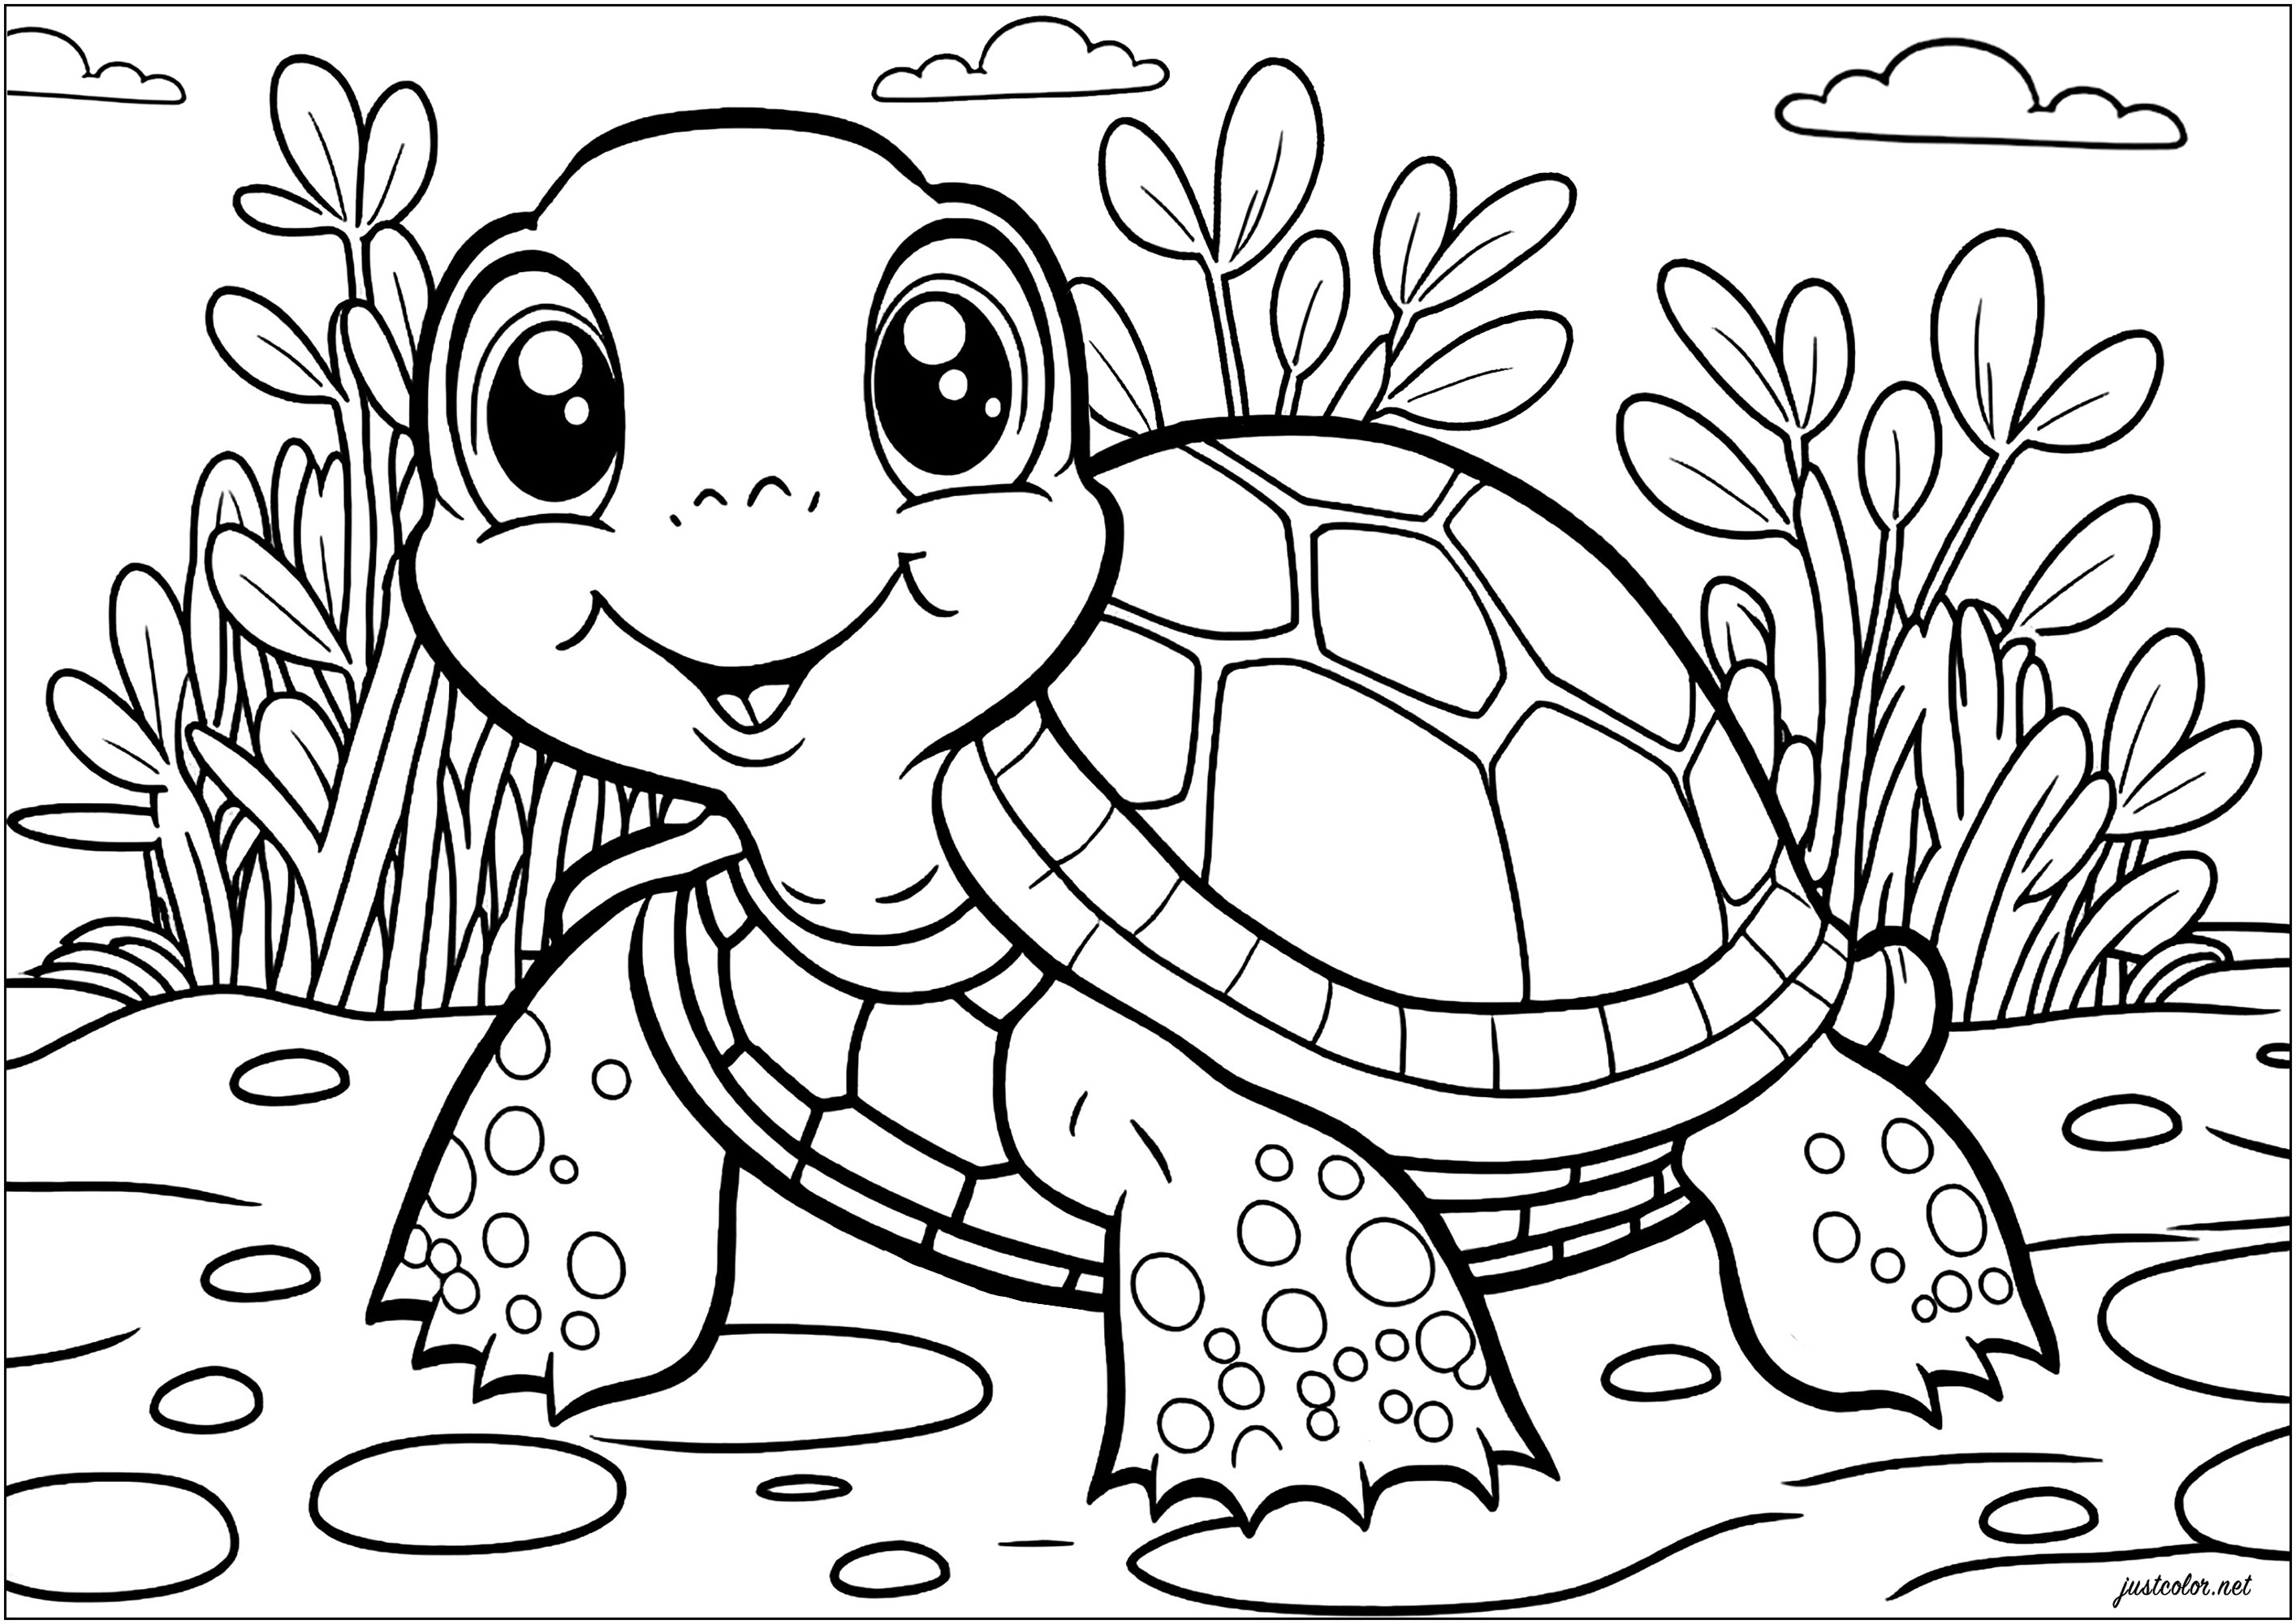 Coloring a cute turtle